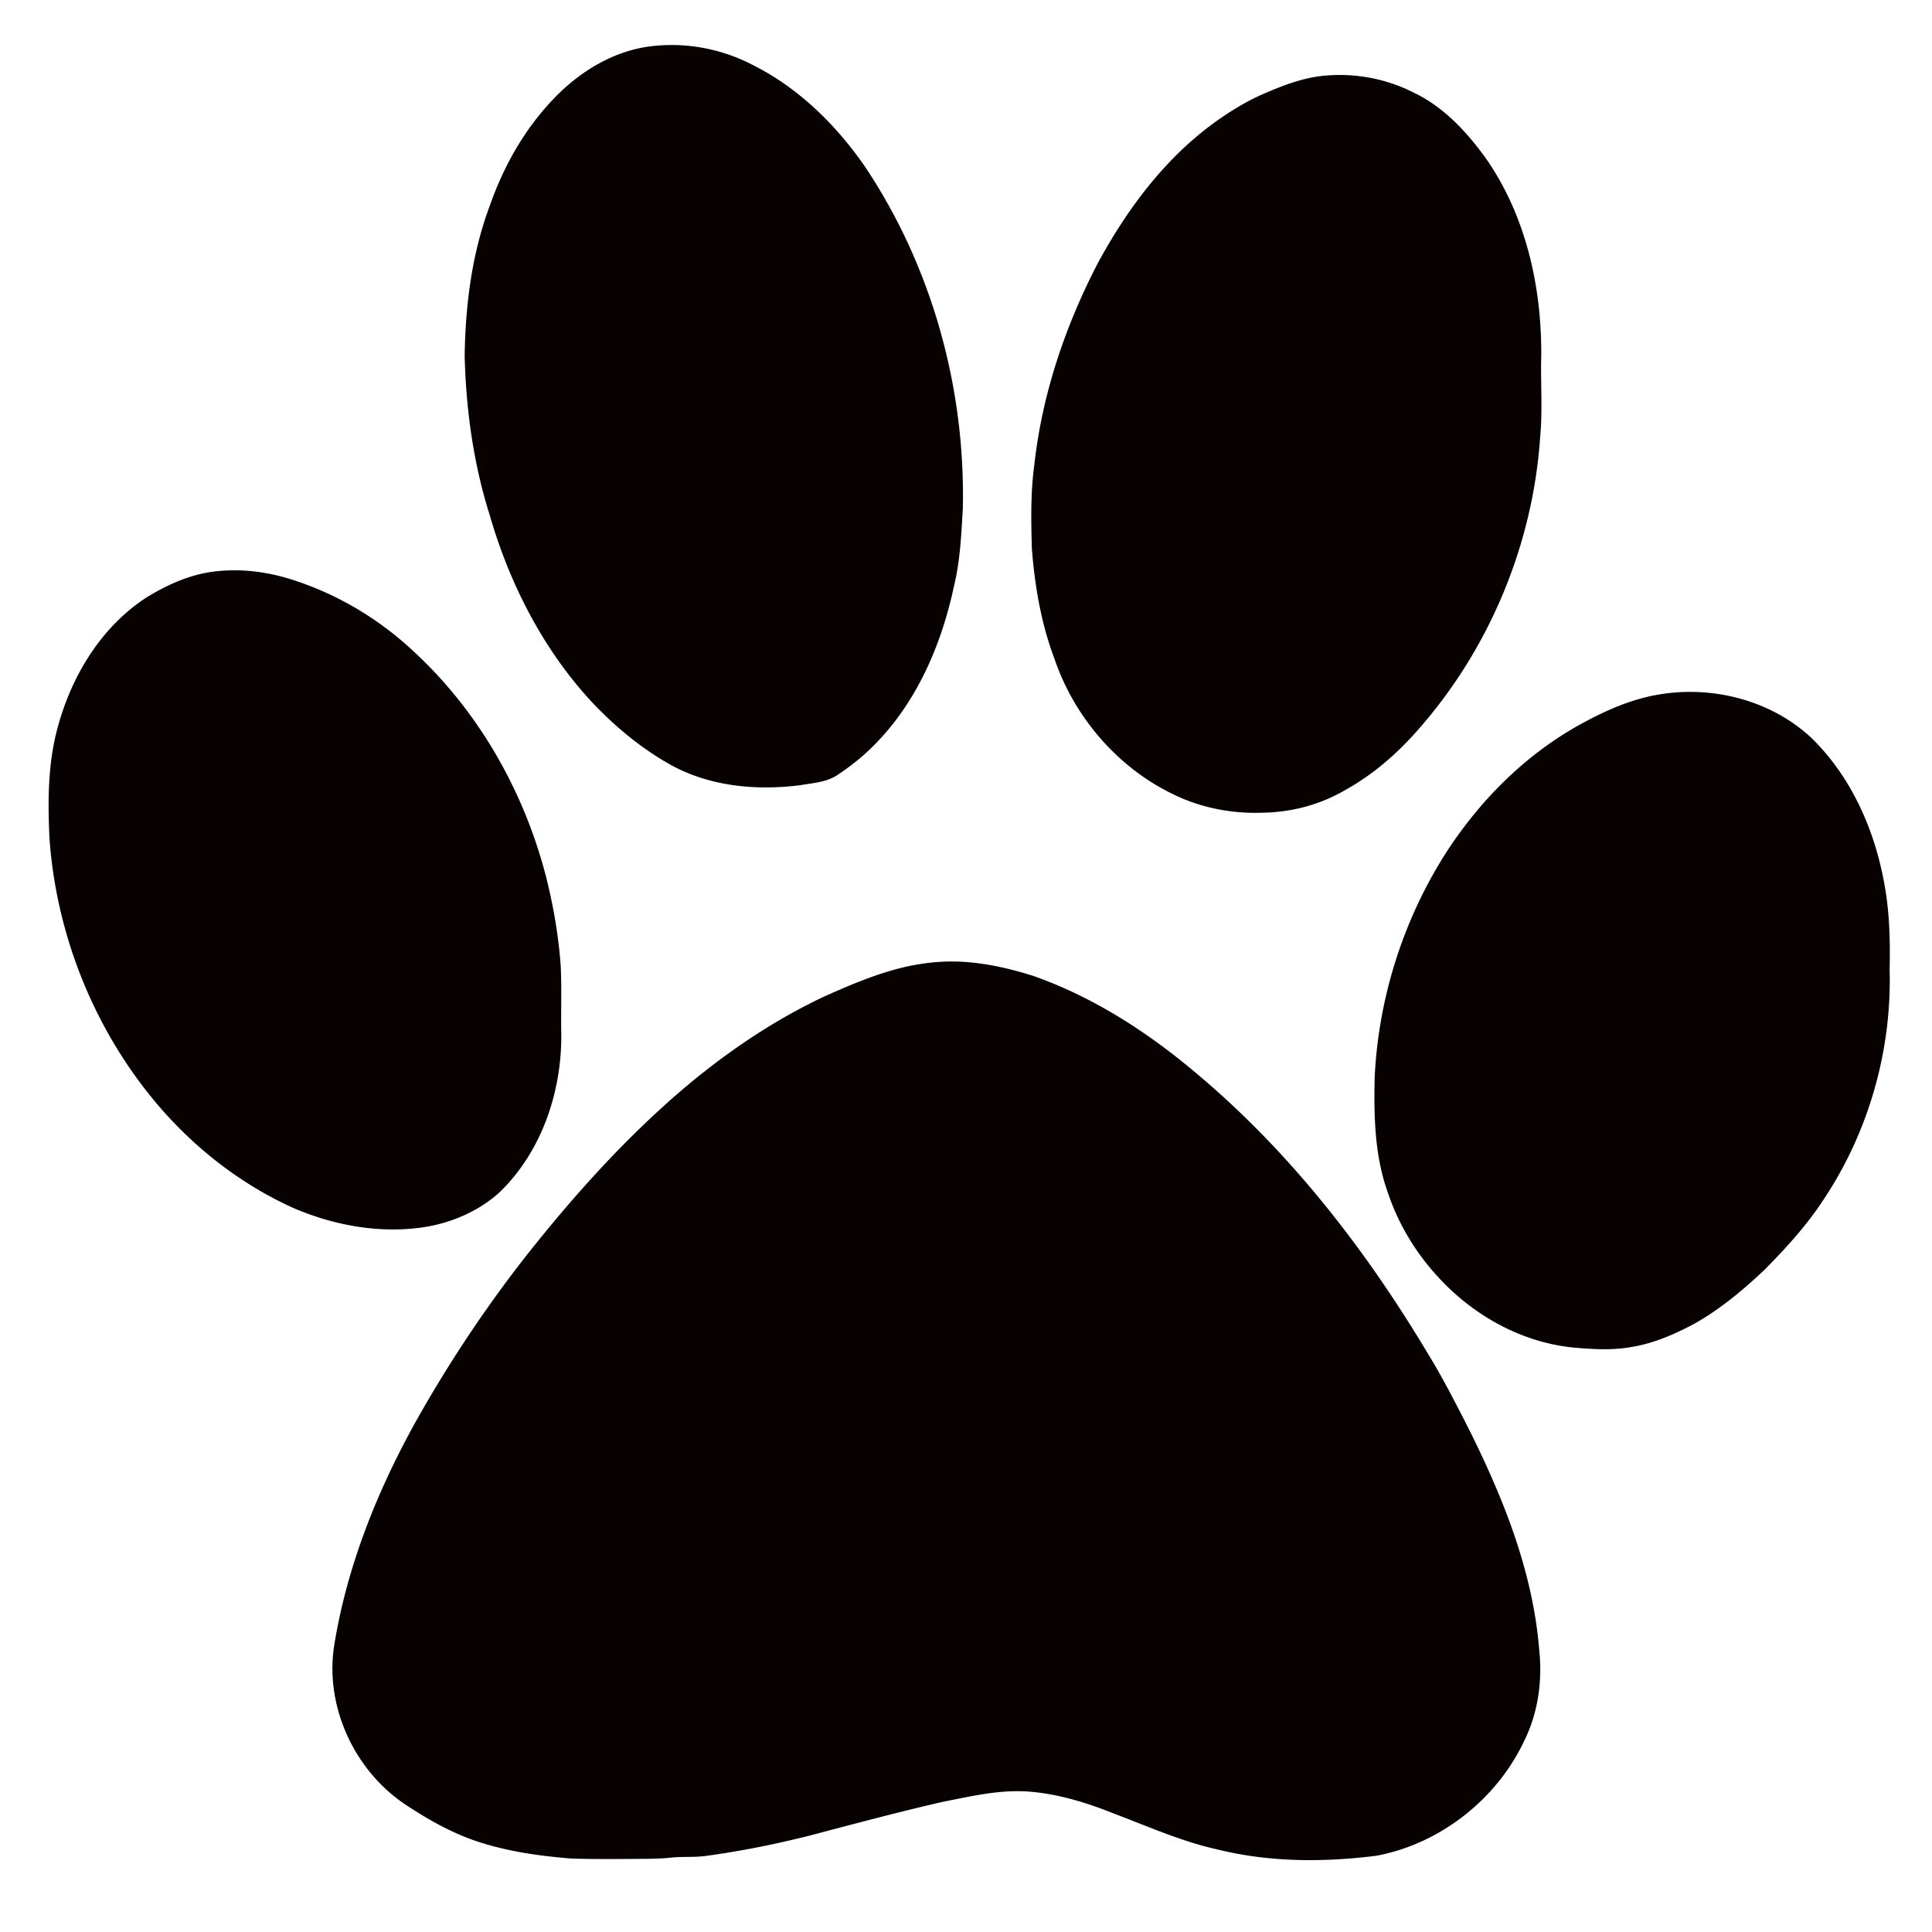 Cougar Paw Print Image Png Clipart